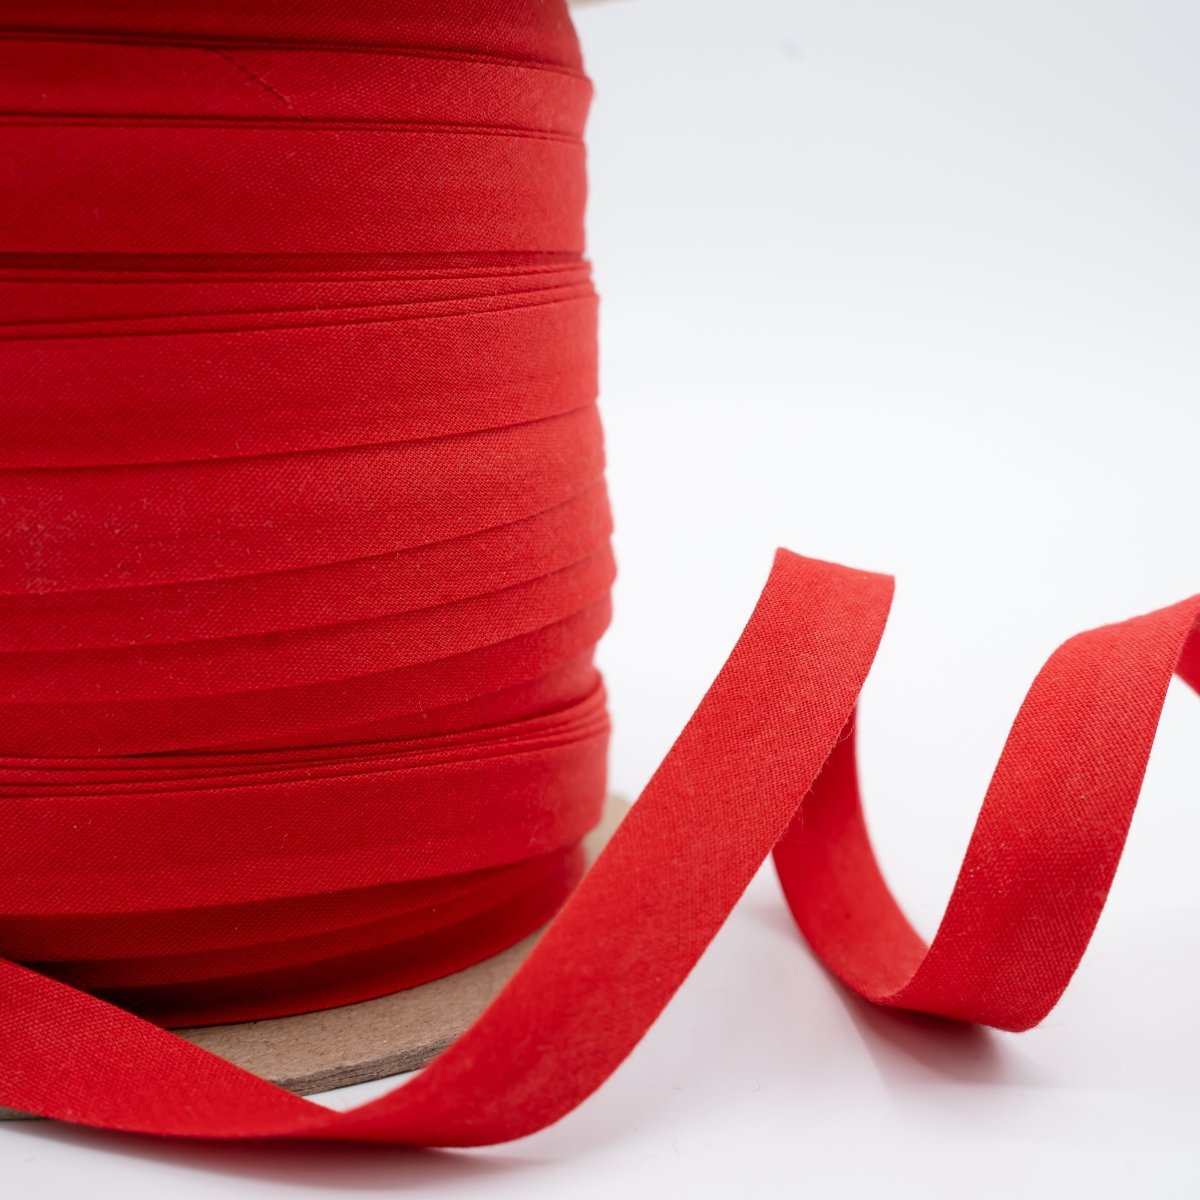 1/2-inch Red Double Fold Bias Tape